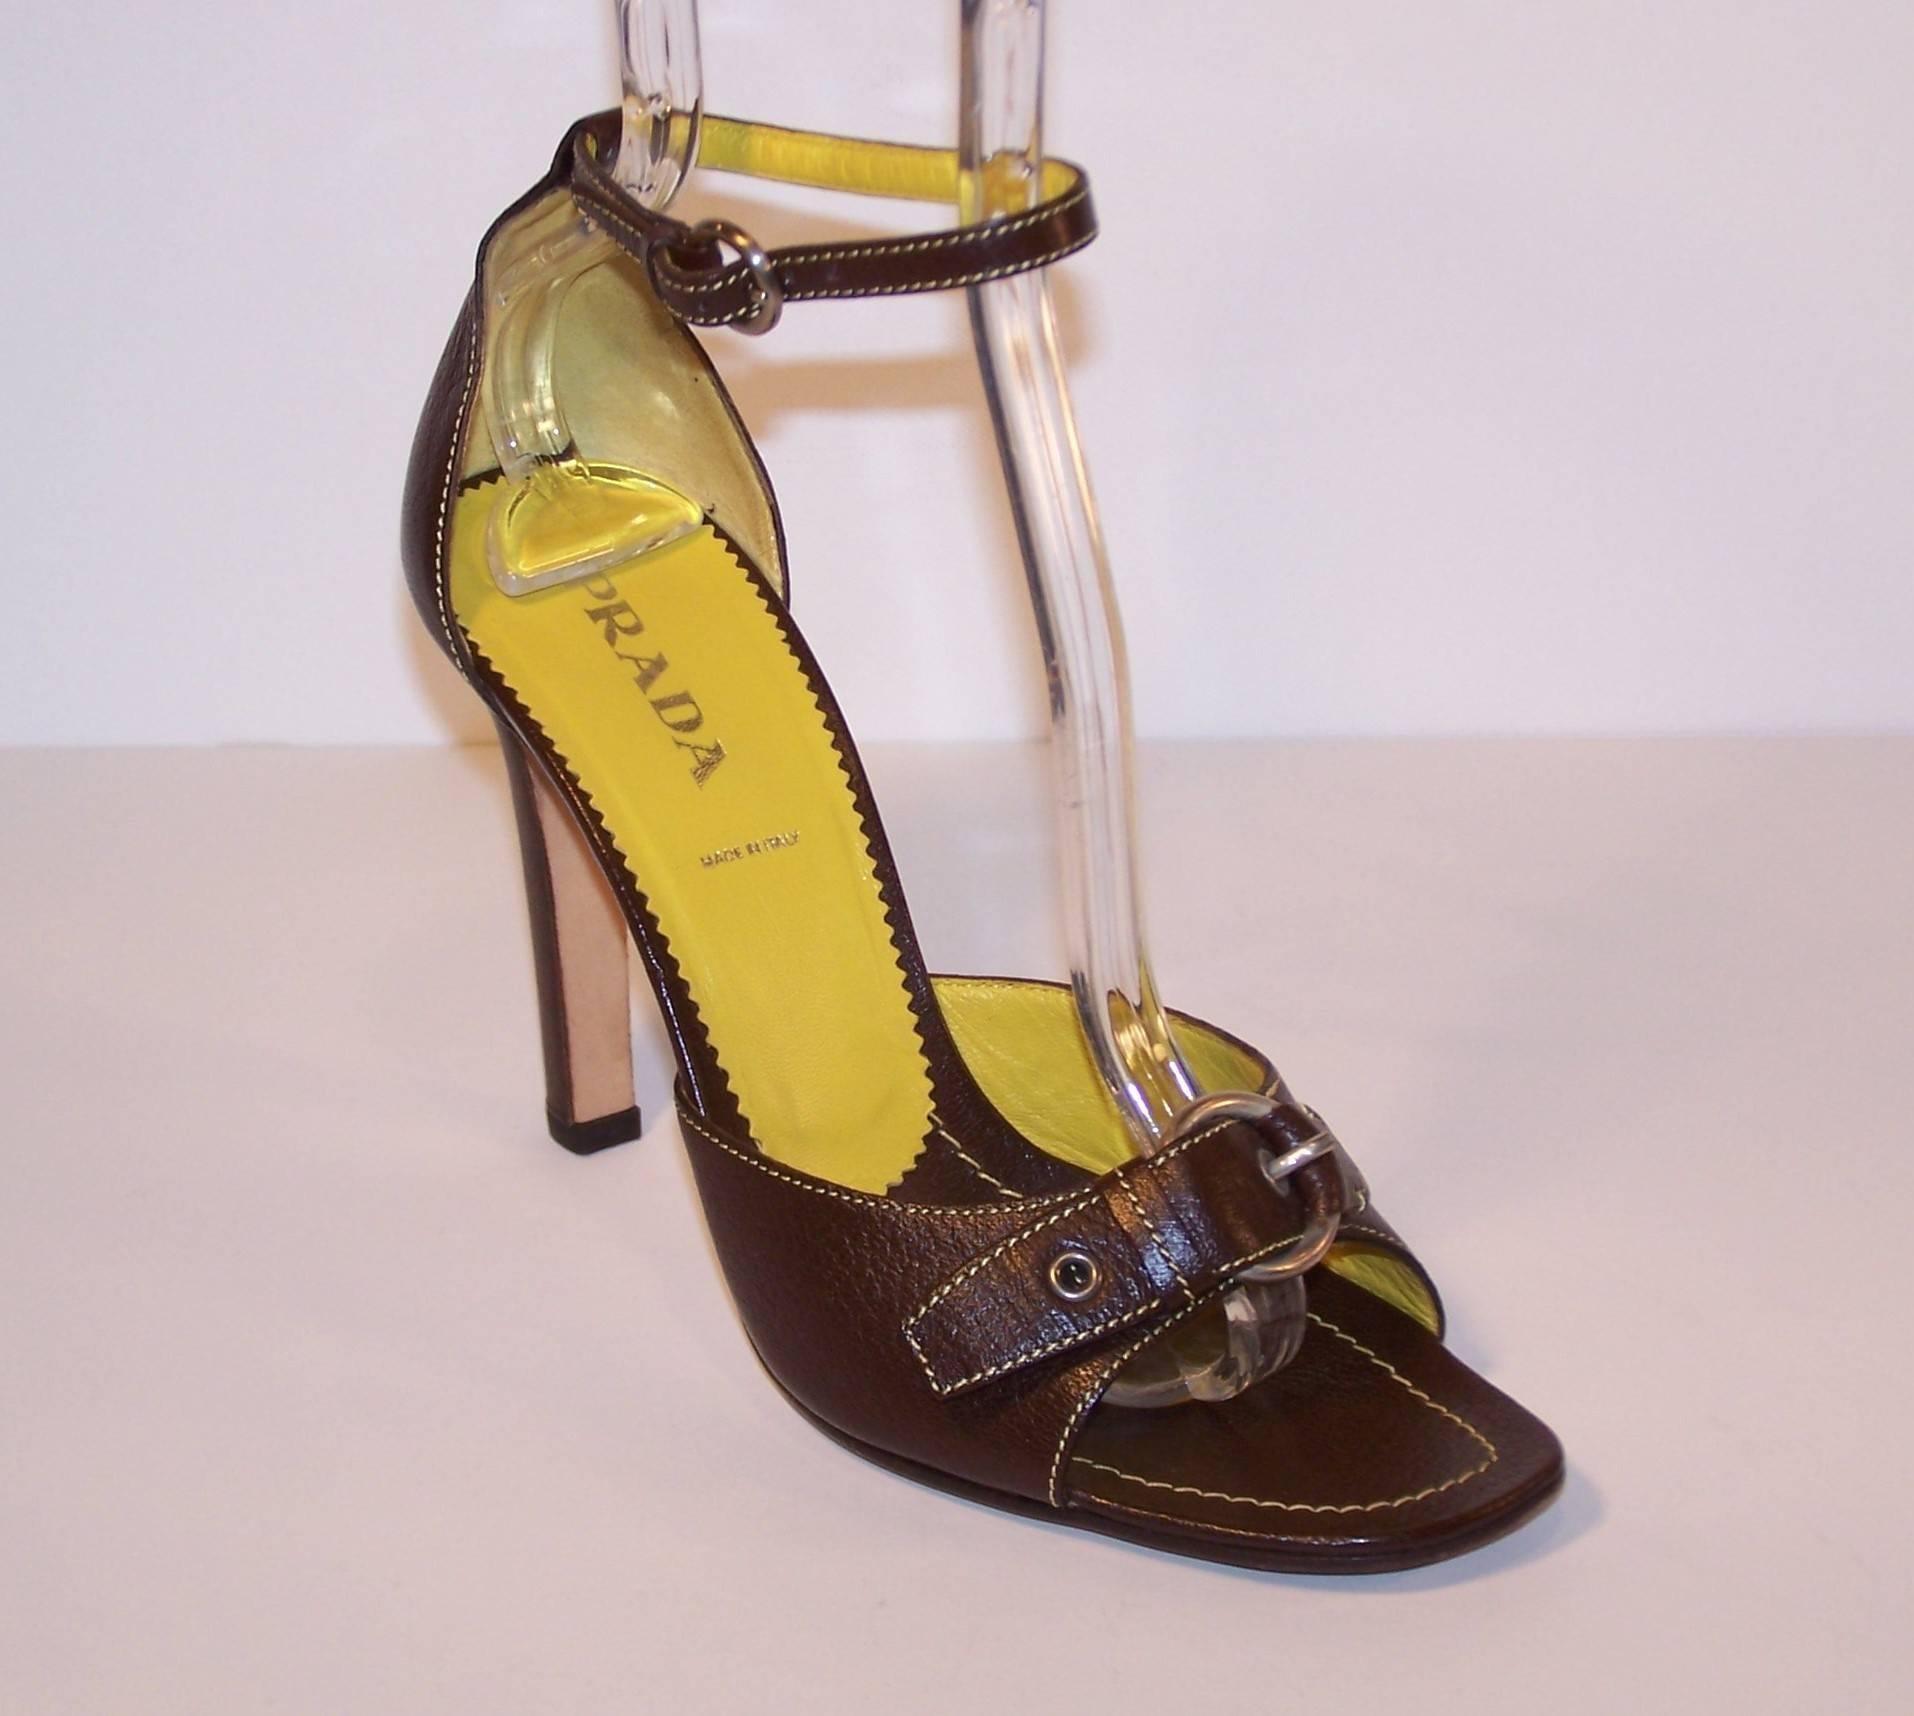 Women's Prada Brown Leather Sandals With Ankle Straps & Buckles Sz 38